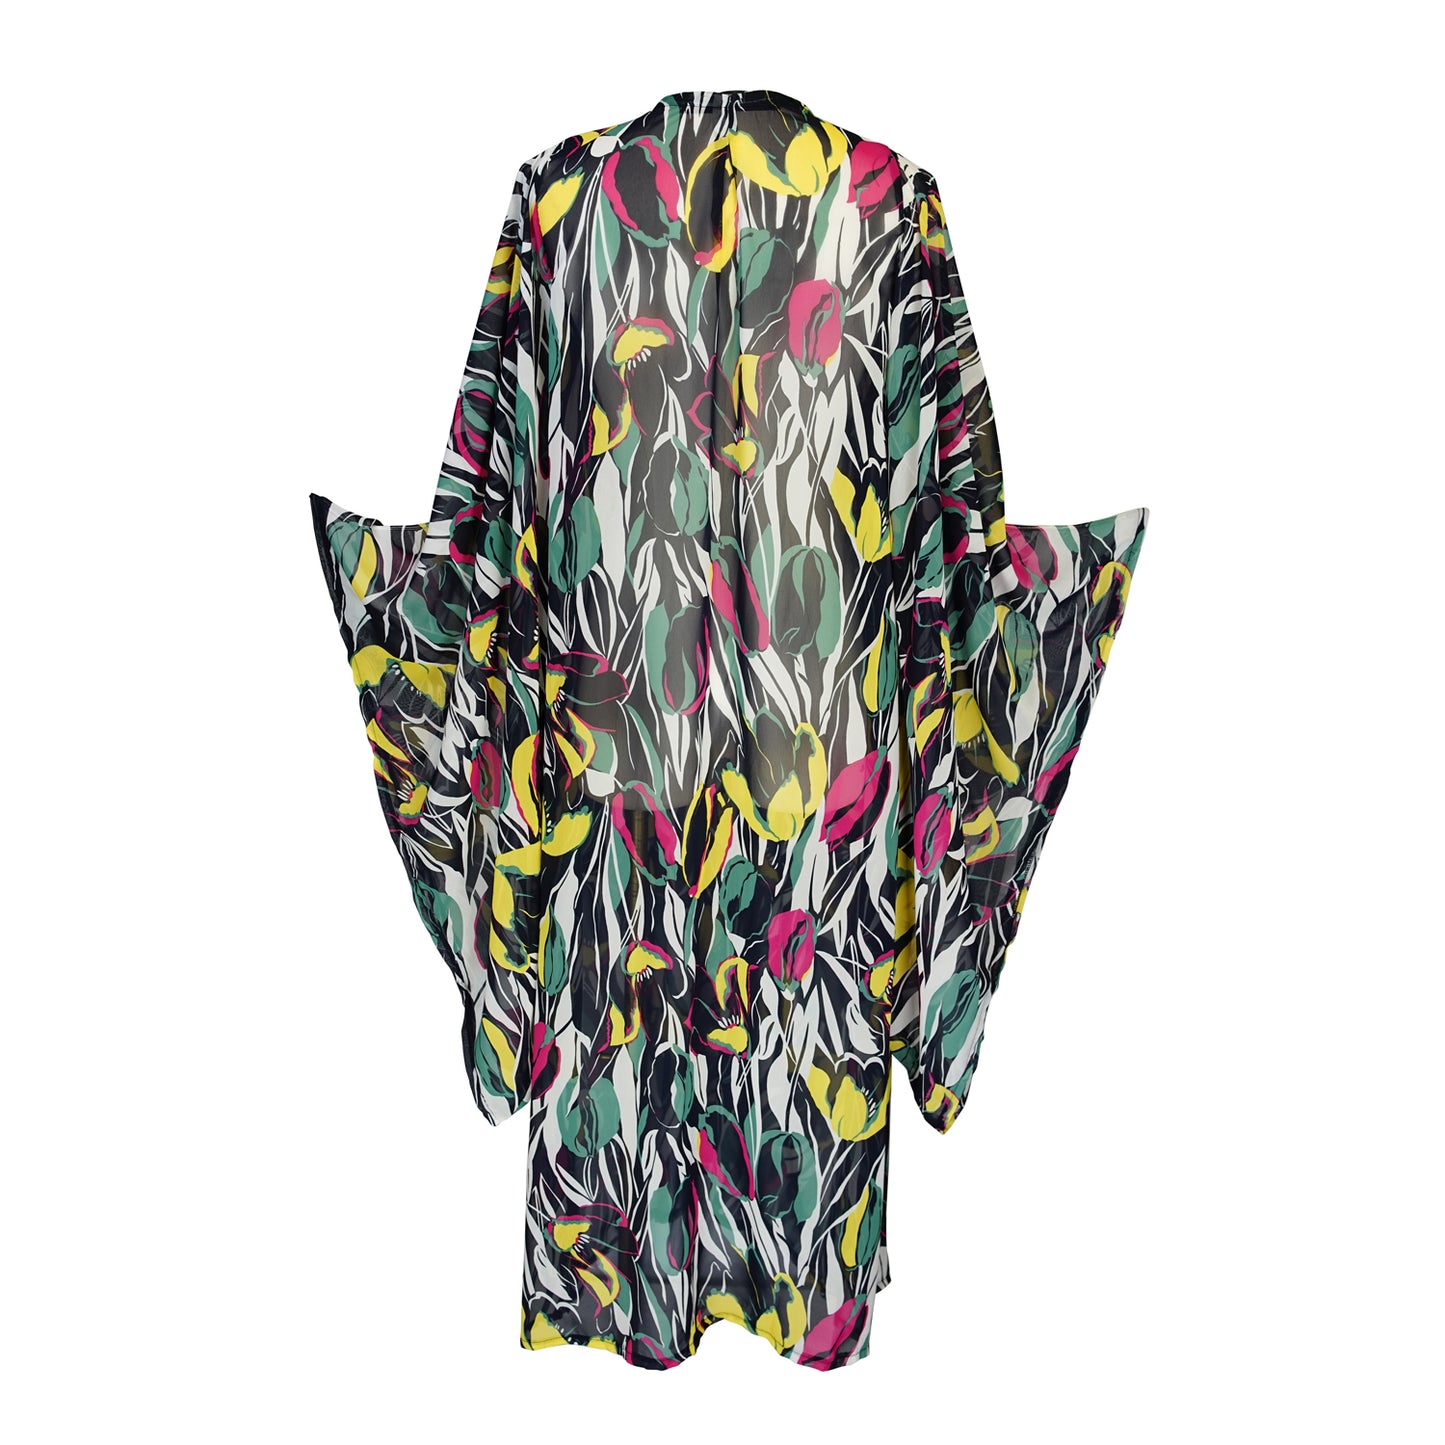 jennafer grace Exotica Cruise kimono semi-sheer chiffon with yellow green pink tulip floral flower print on abstract black and white cover-up wrap dress with pockets duster jacket robe boho boho bohemian hippie whimsical romantic beach poolside resort cabana lounge wear unisex handmade in California USA